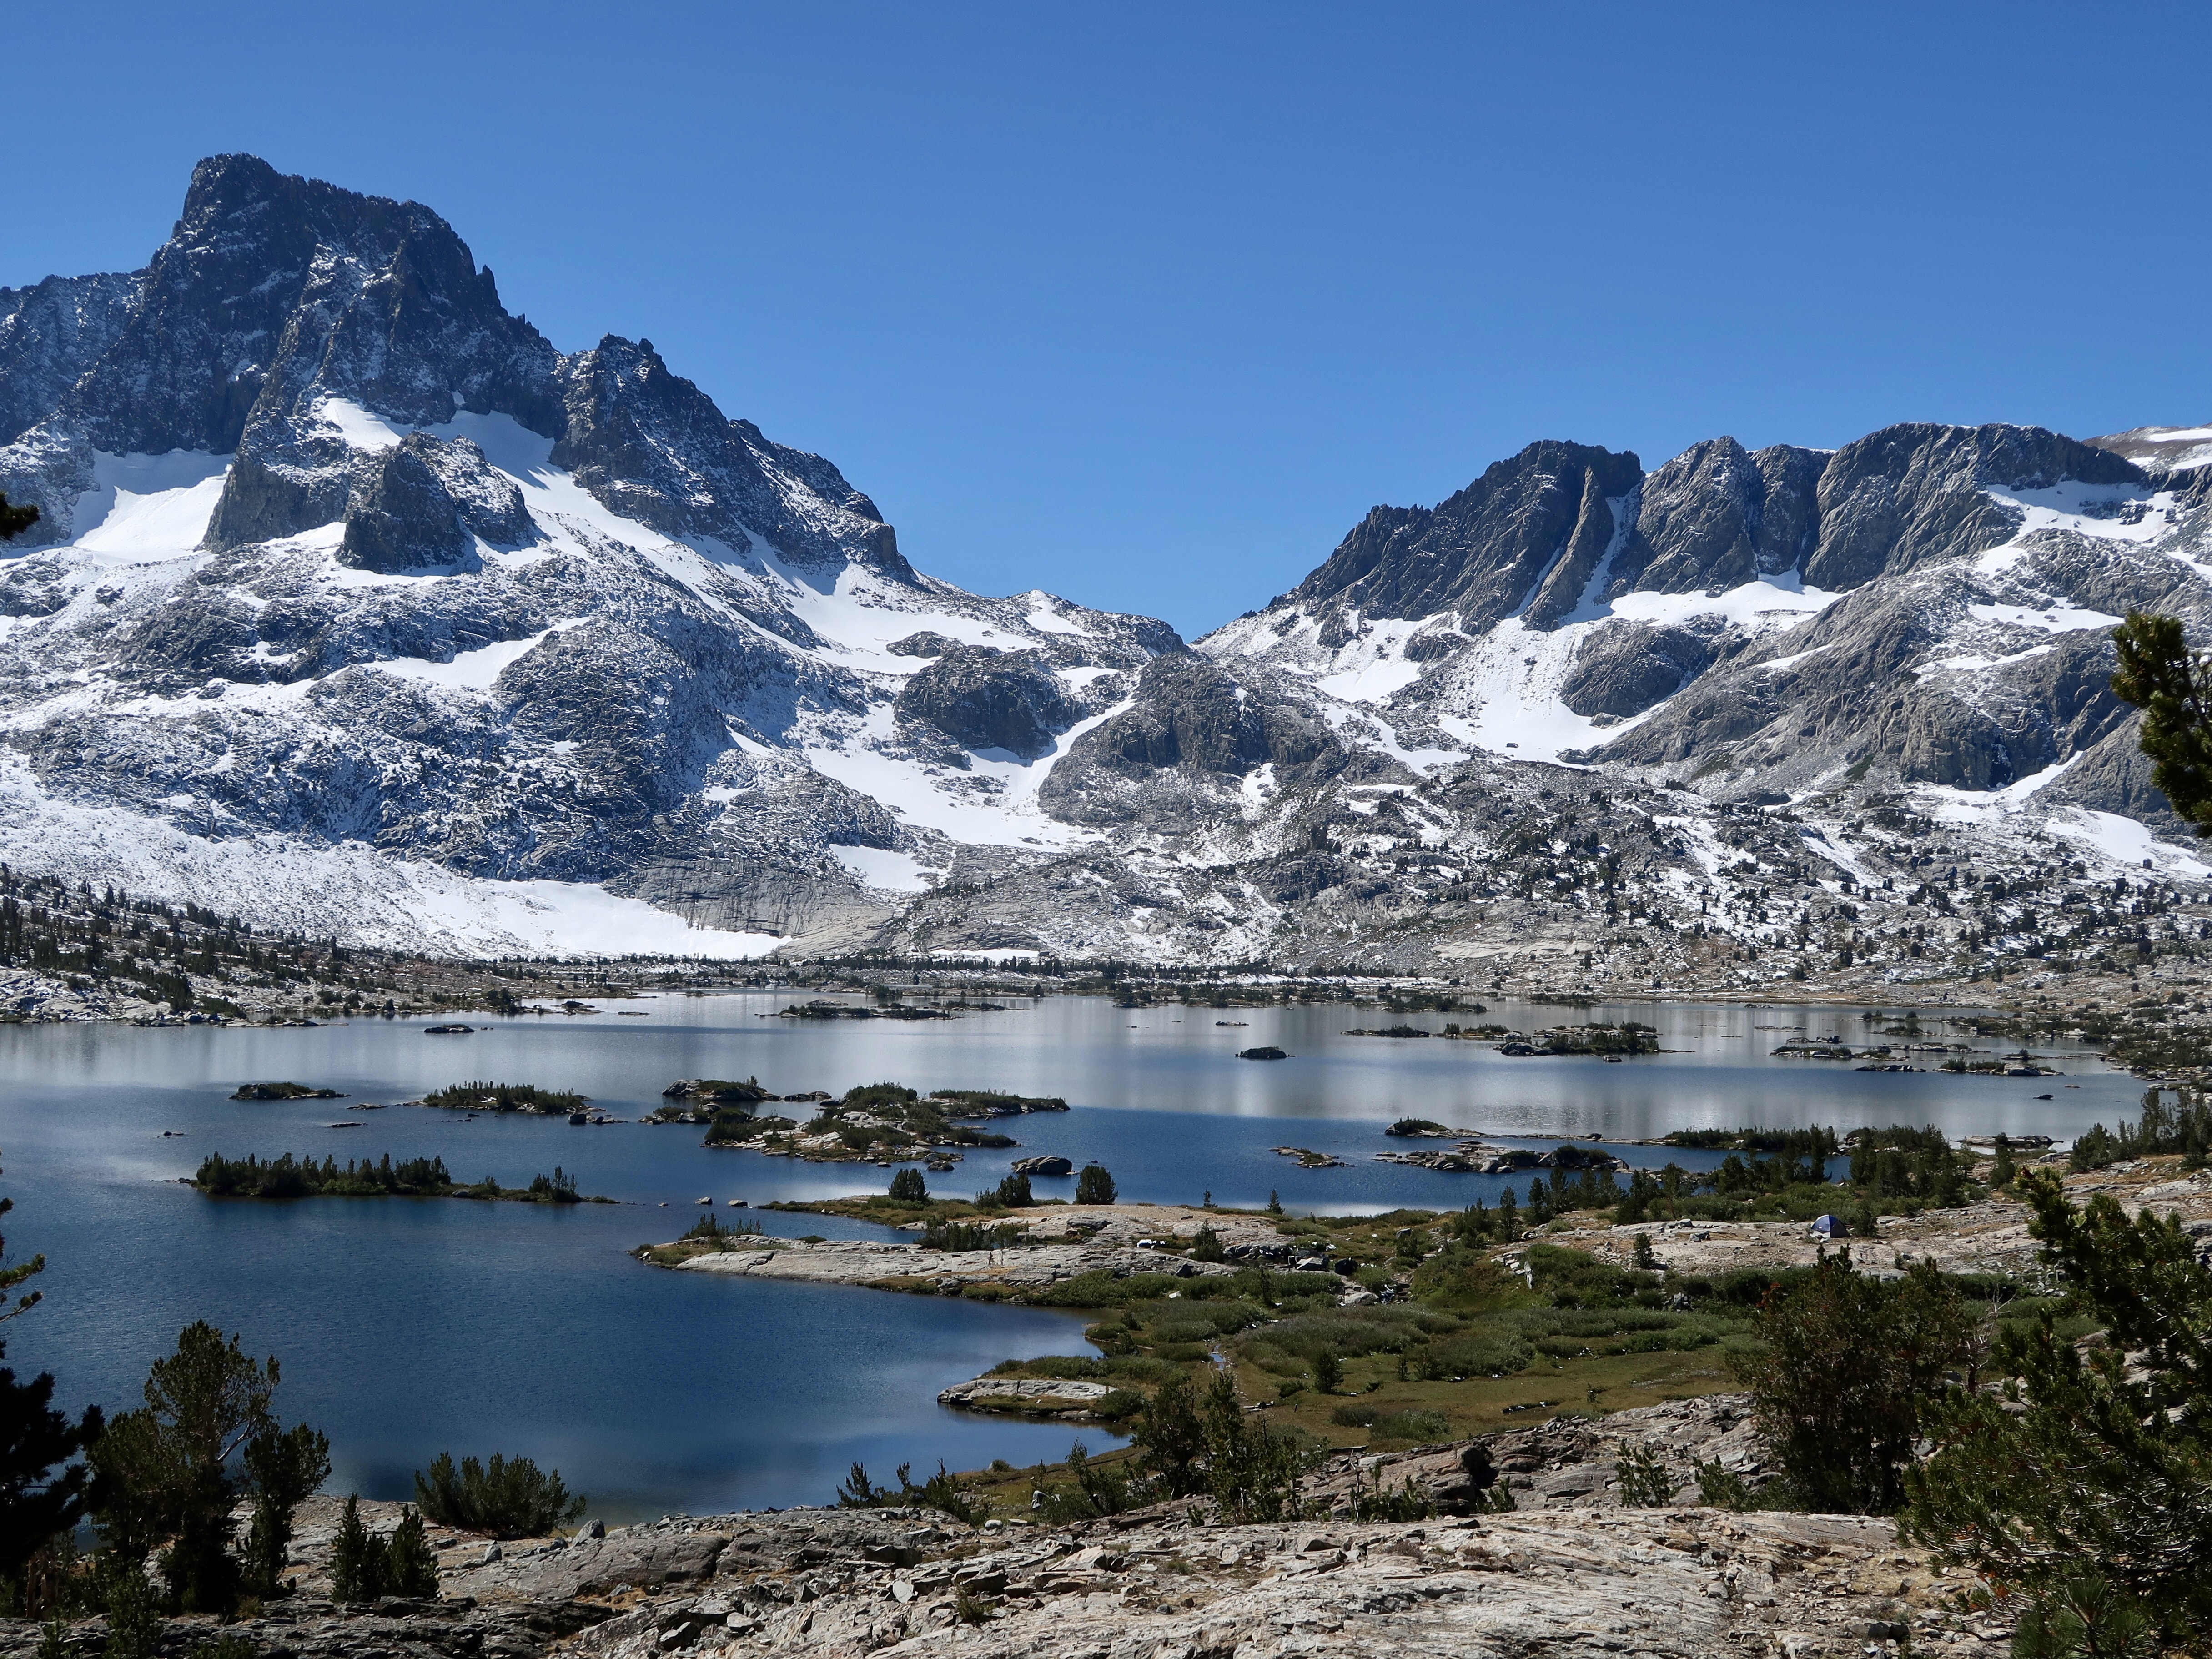 PCT Day 167 – Crossing Donahue Pass to Yosemite National Park